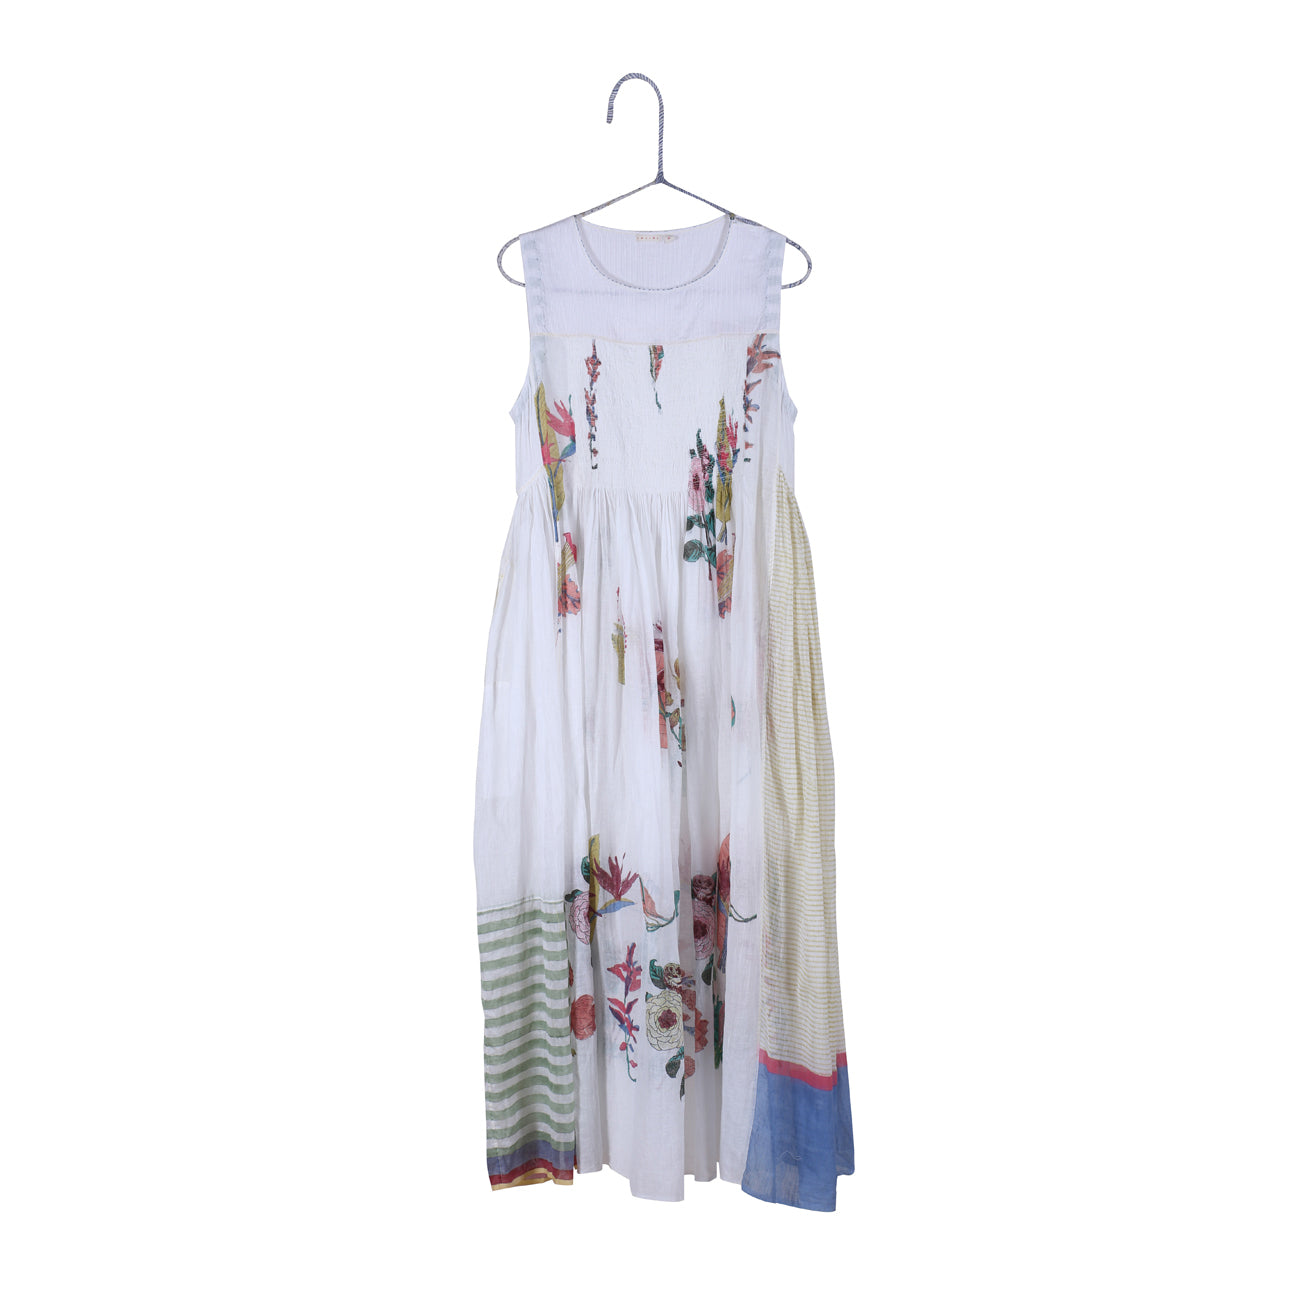 sleeveless dress in floral embroidery